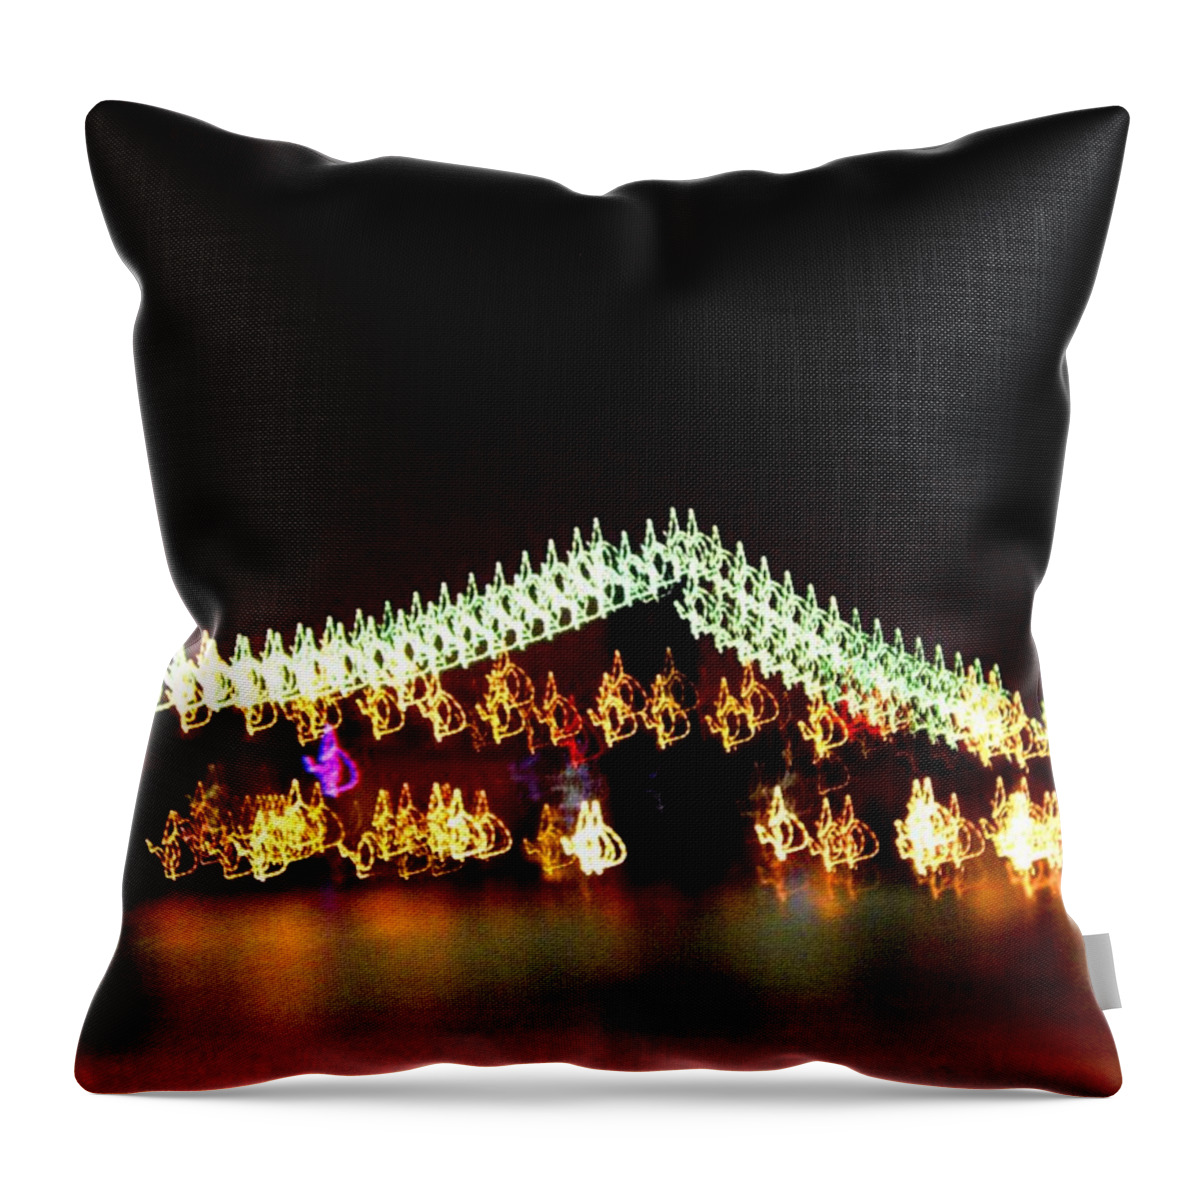 Brooklyn Bridge Throw Pillow featuring the photograph Brooklyn Bridge at Night by Cleaster Cotton